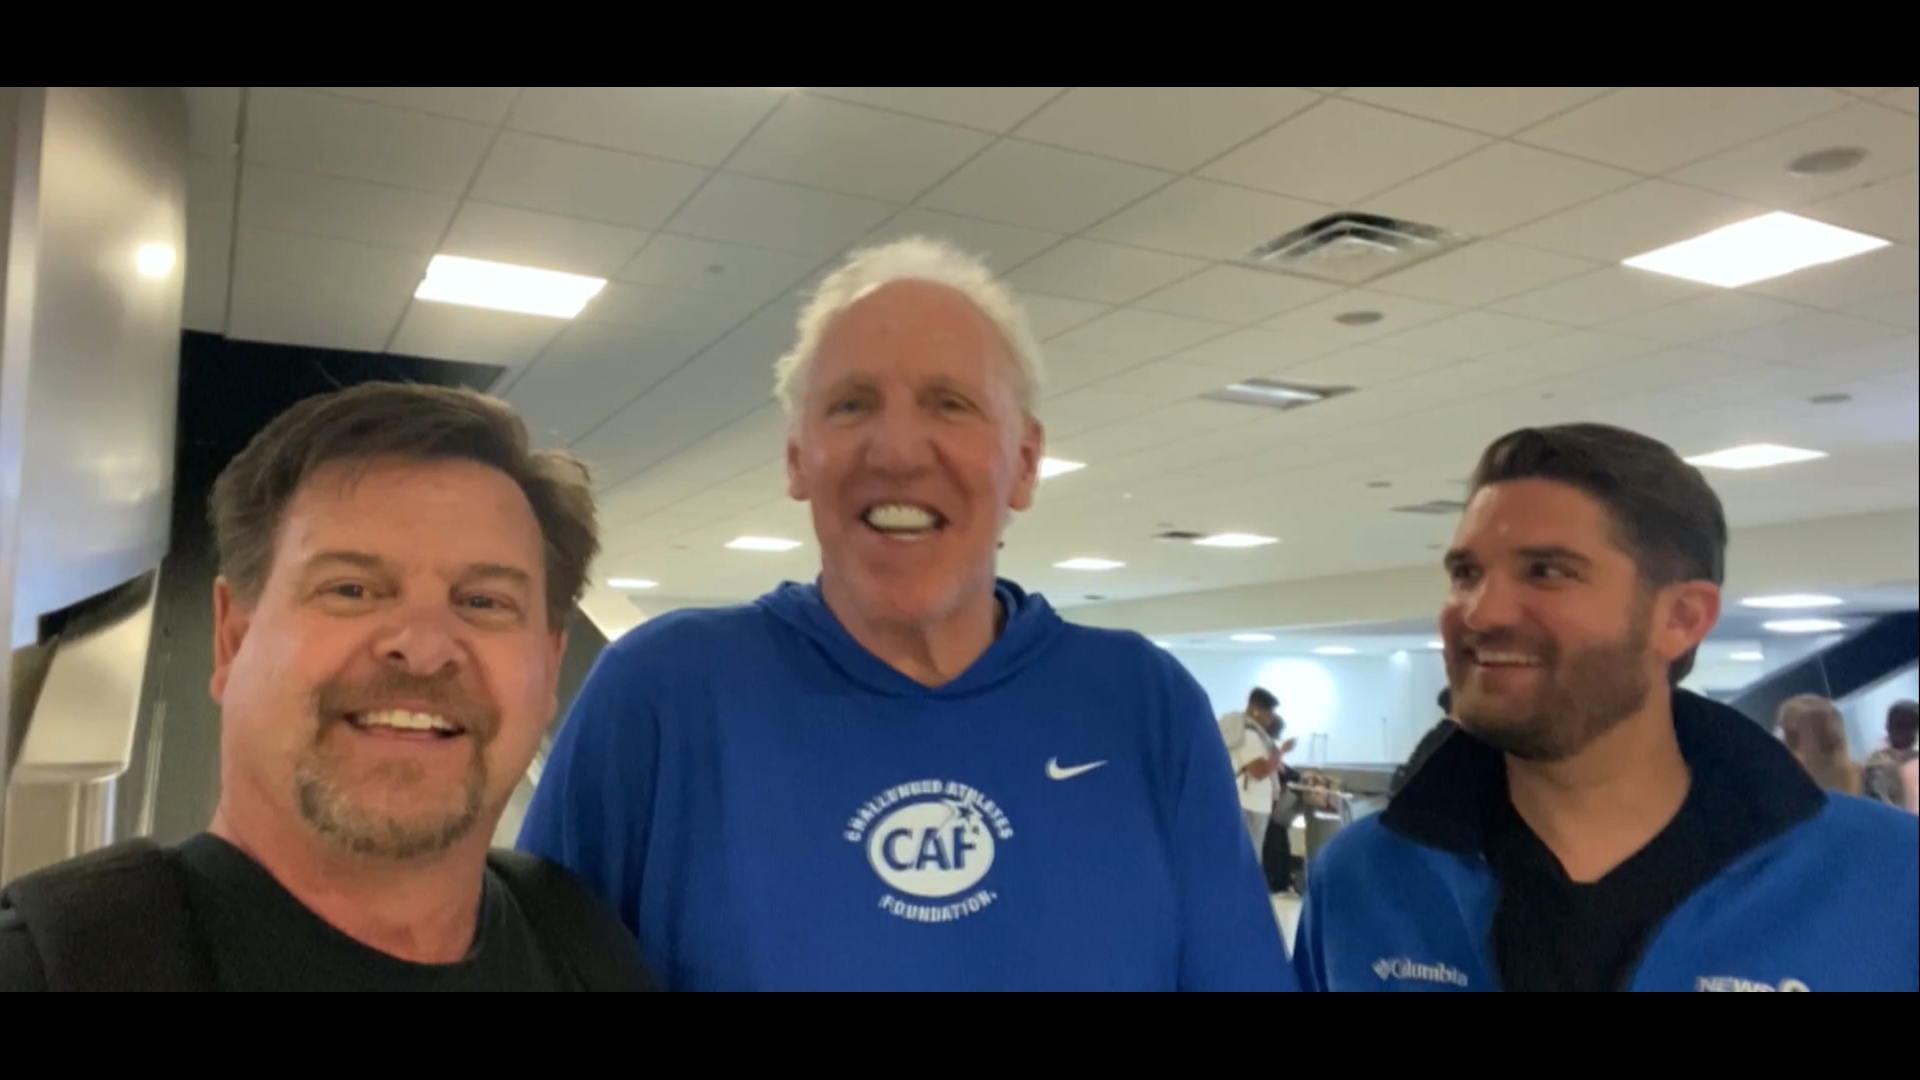 CBS 8's Jake Garegnani and John Howard interviewed Bill Walton in the Houston Airport on their way to the Final Four.